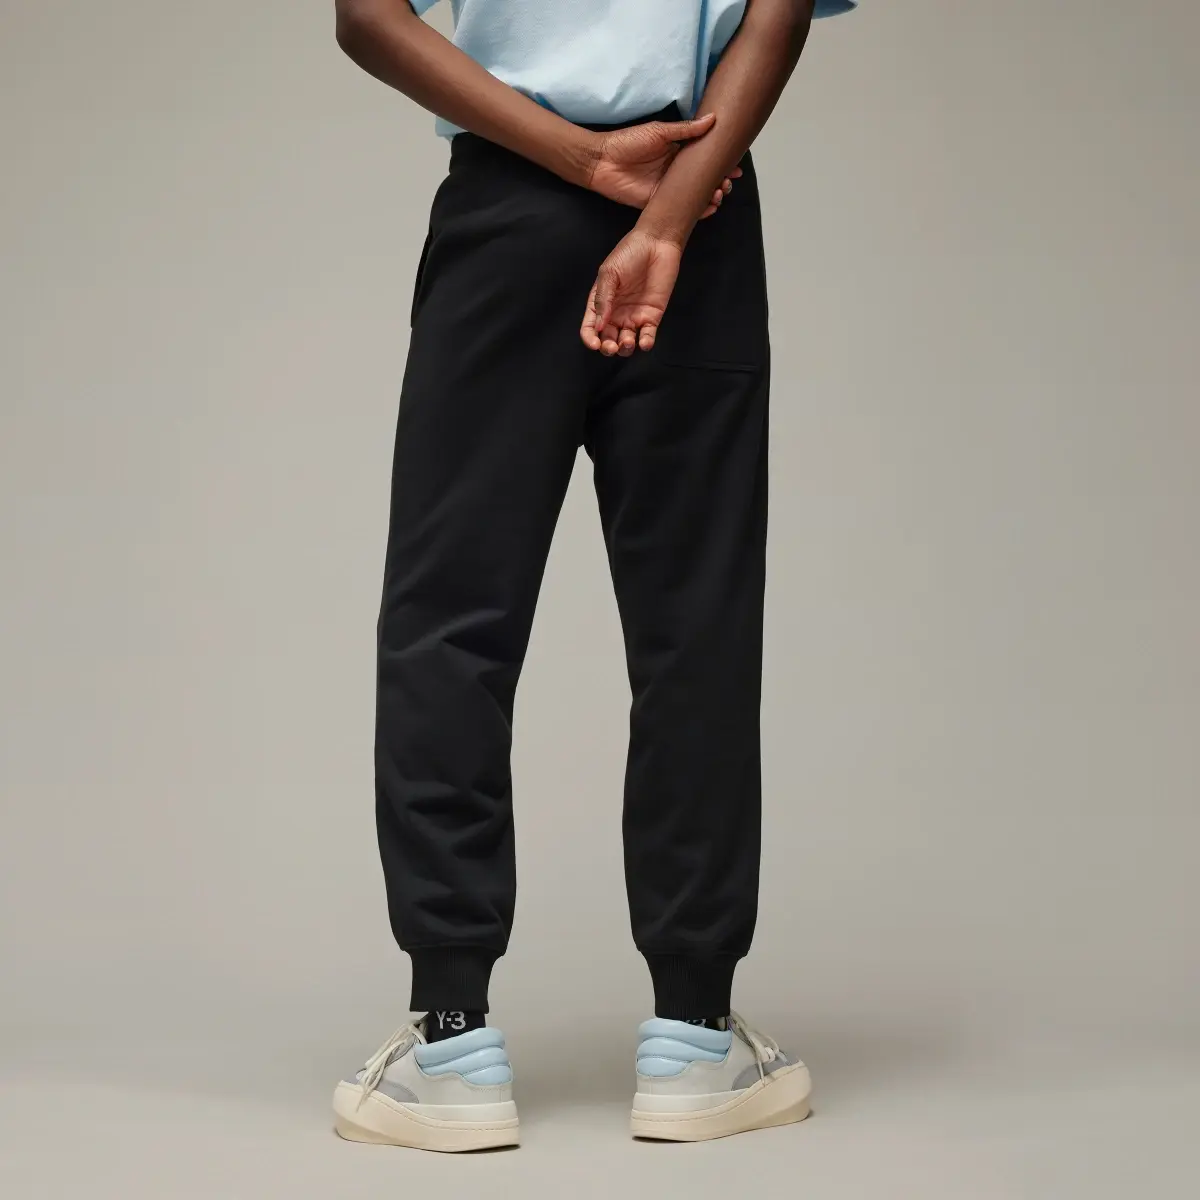 Adidas Y-3 French Terry Cuffed Pants. 3